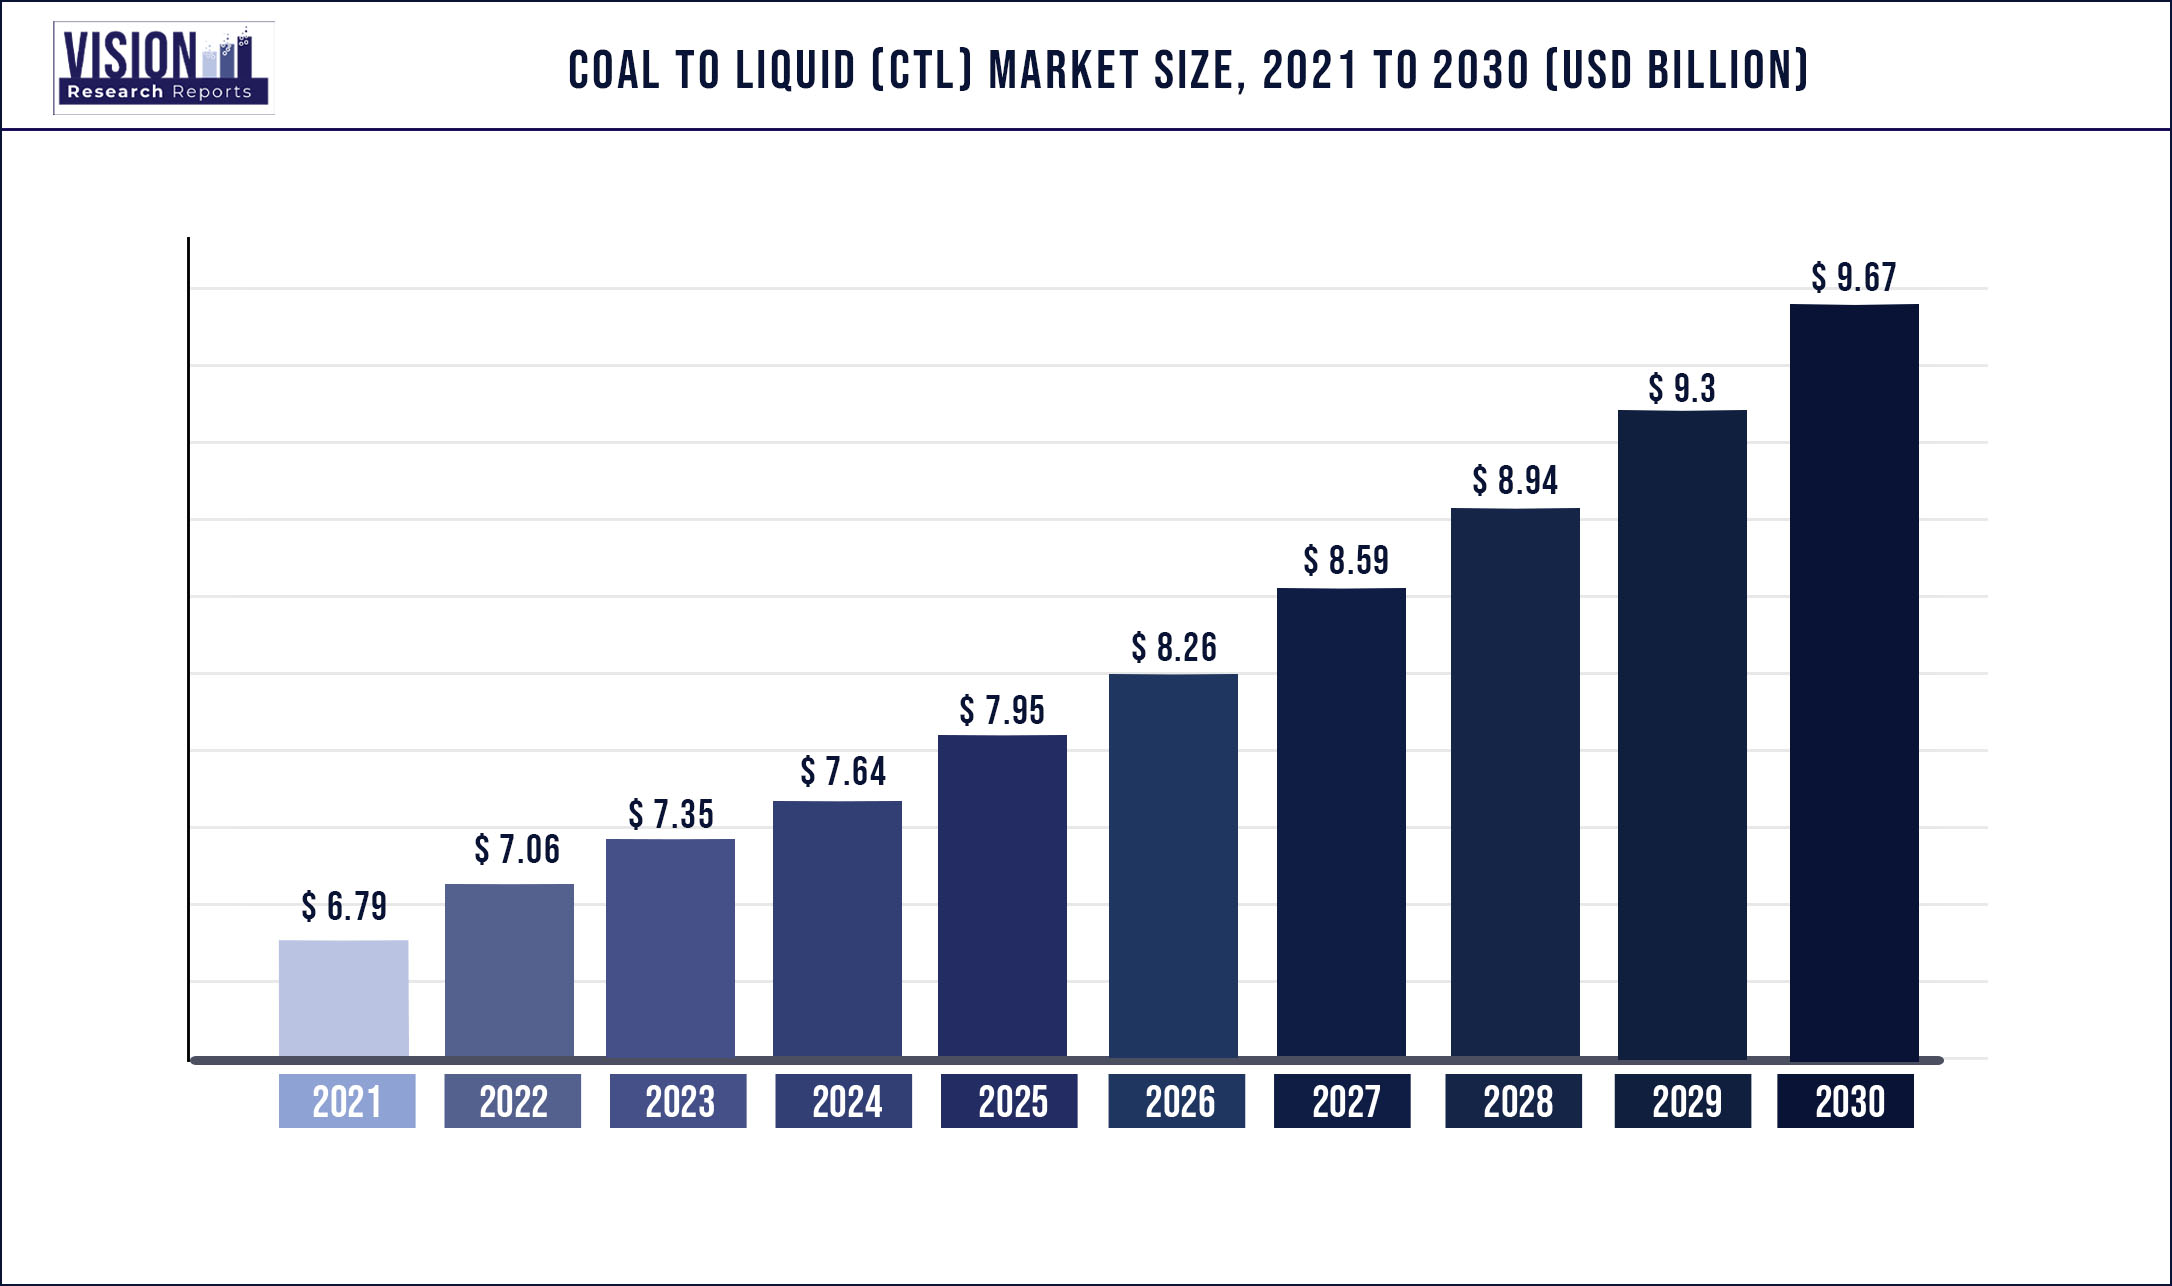 Coal To Liquid (CTL) Market Size 2021 to 2030